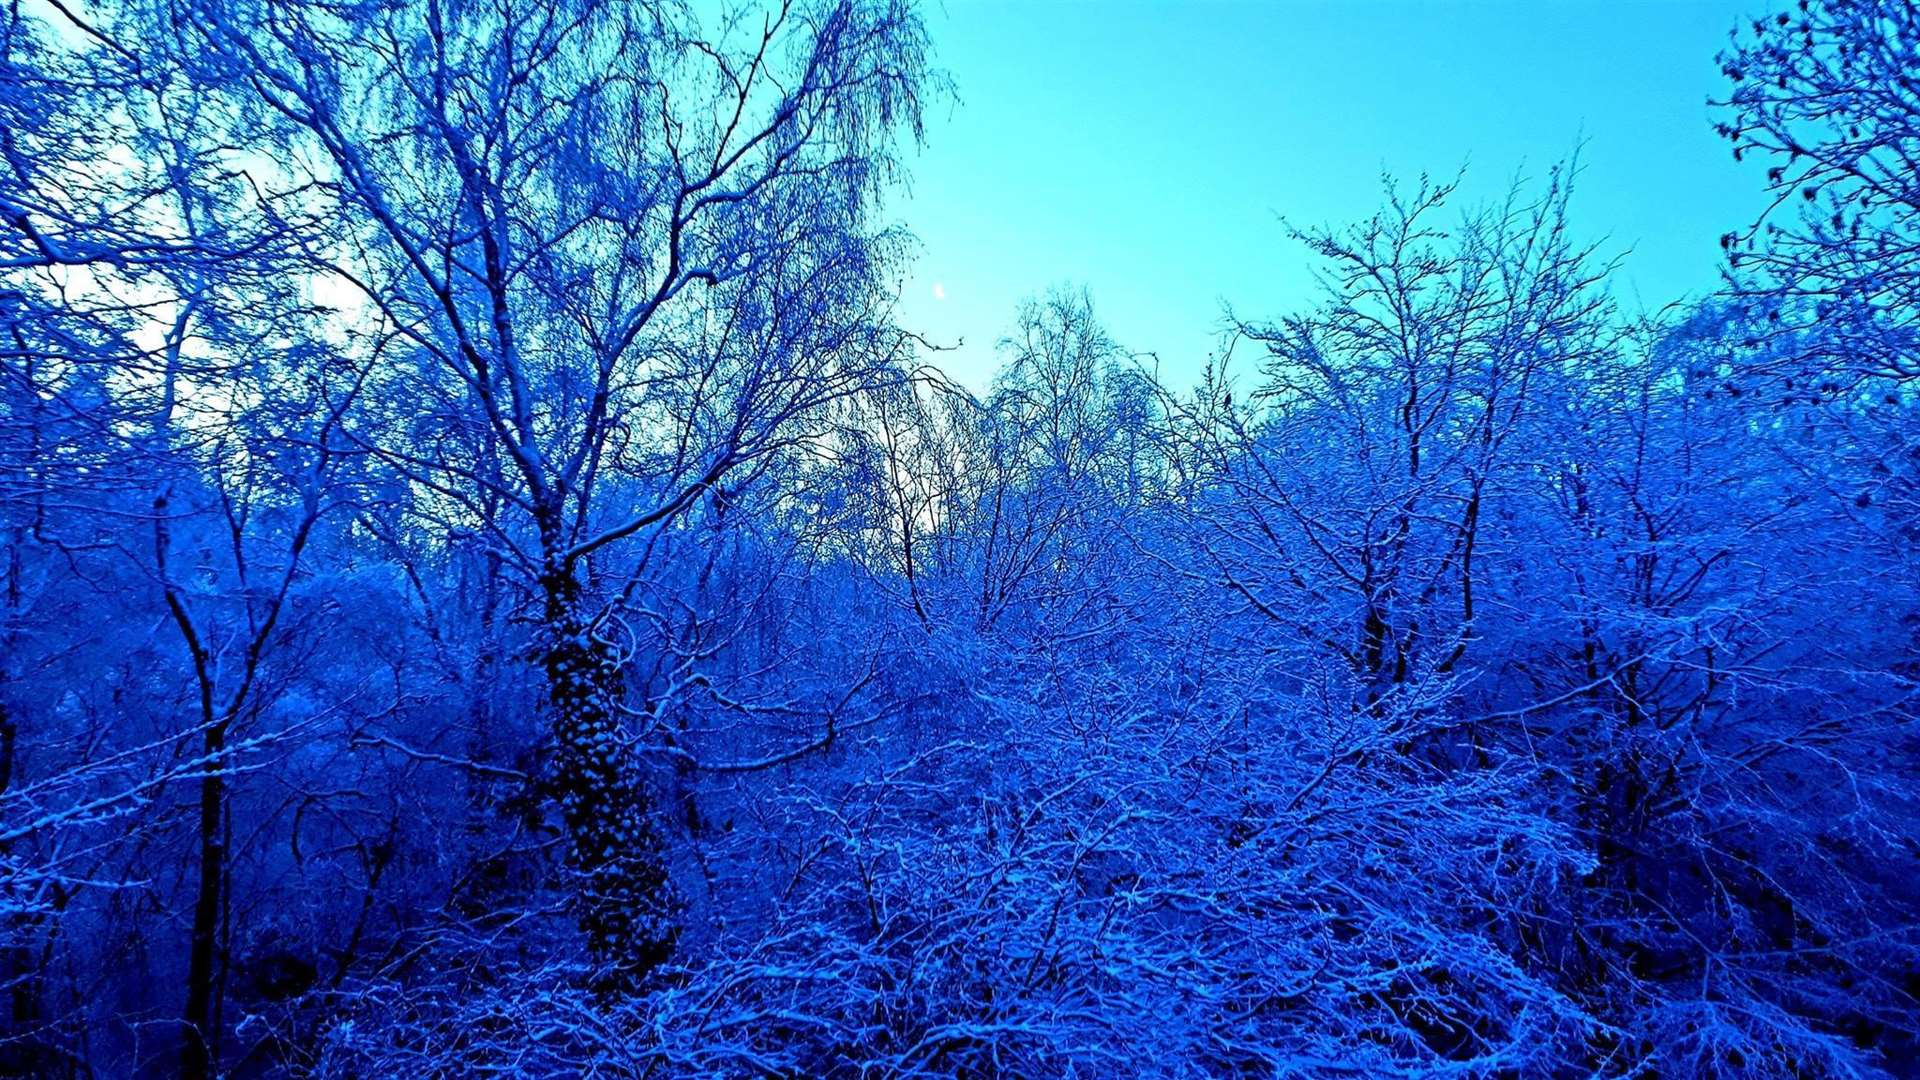 Andy sent in this icy blue pic of his garden.